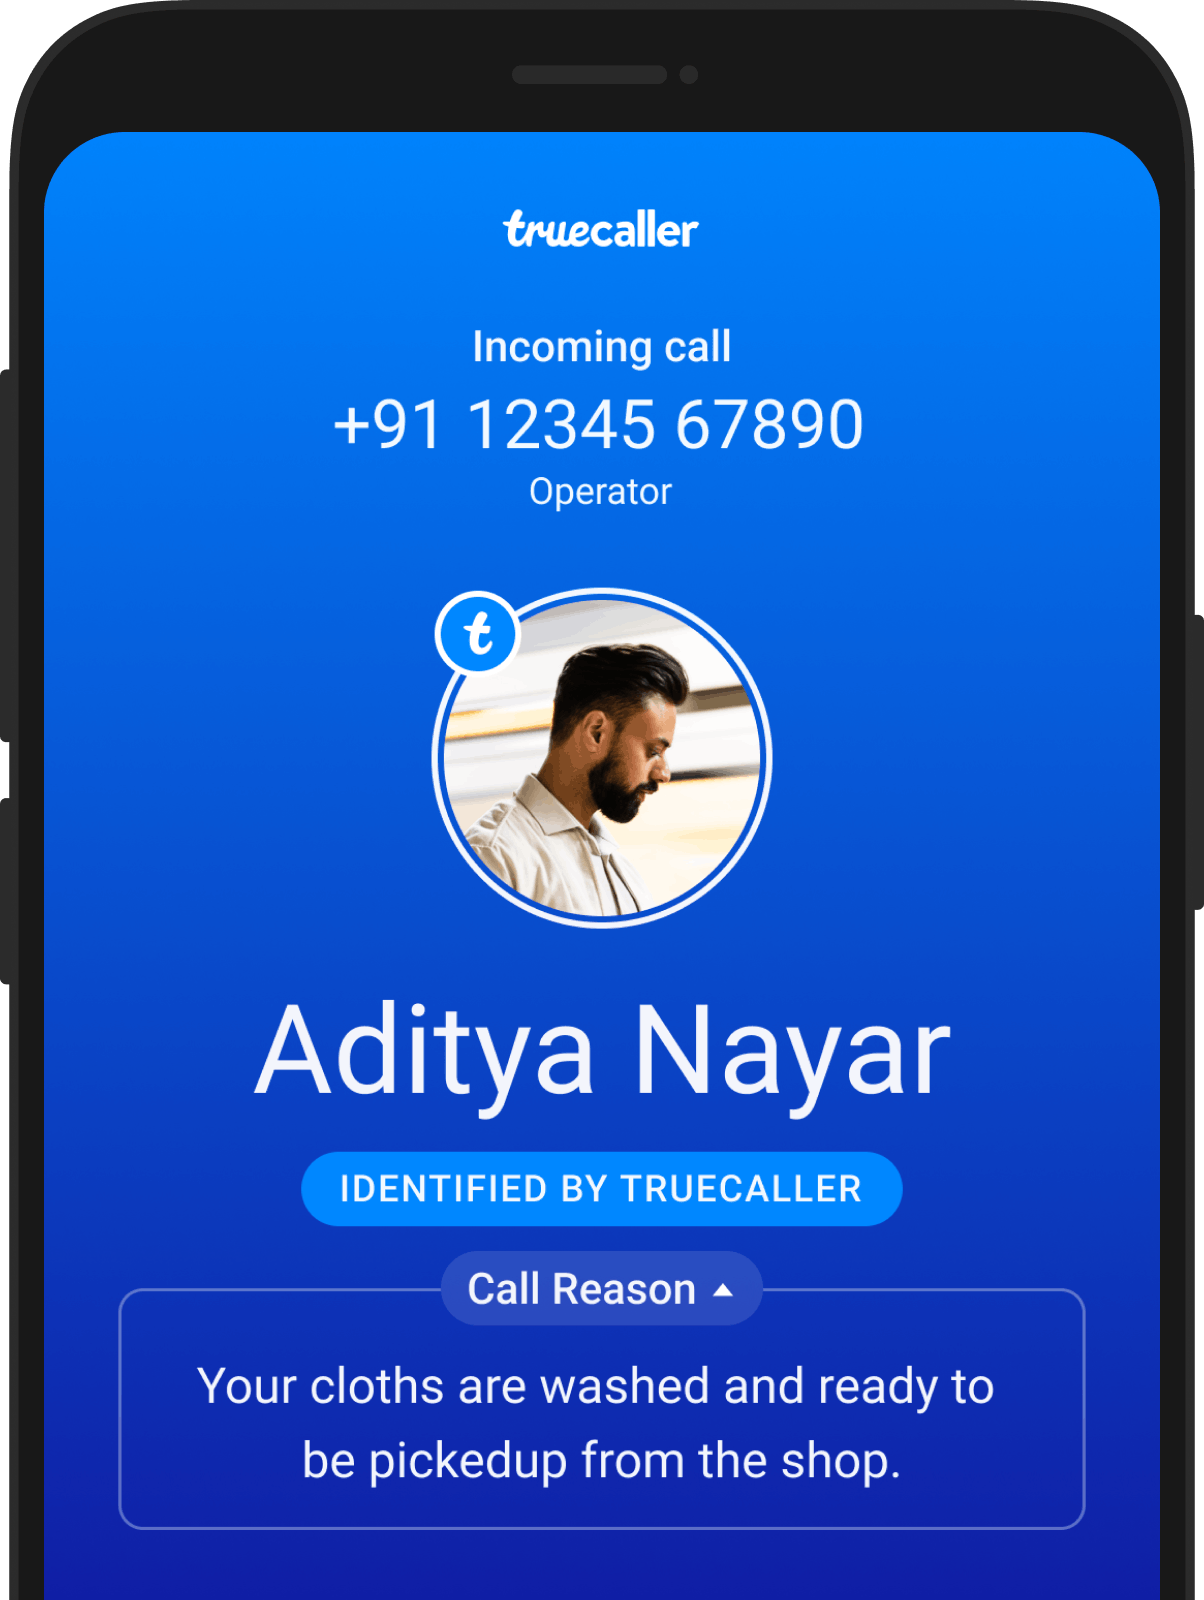 Call Reason Screen on Truecaller for Incoming Call